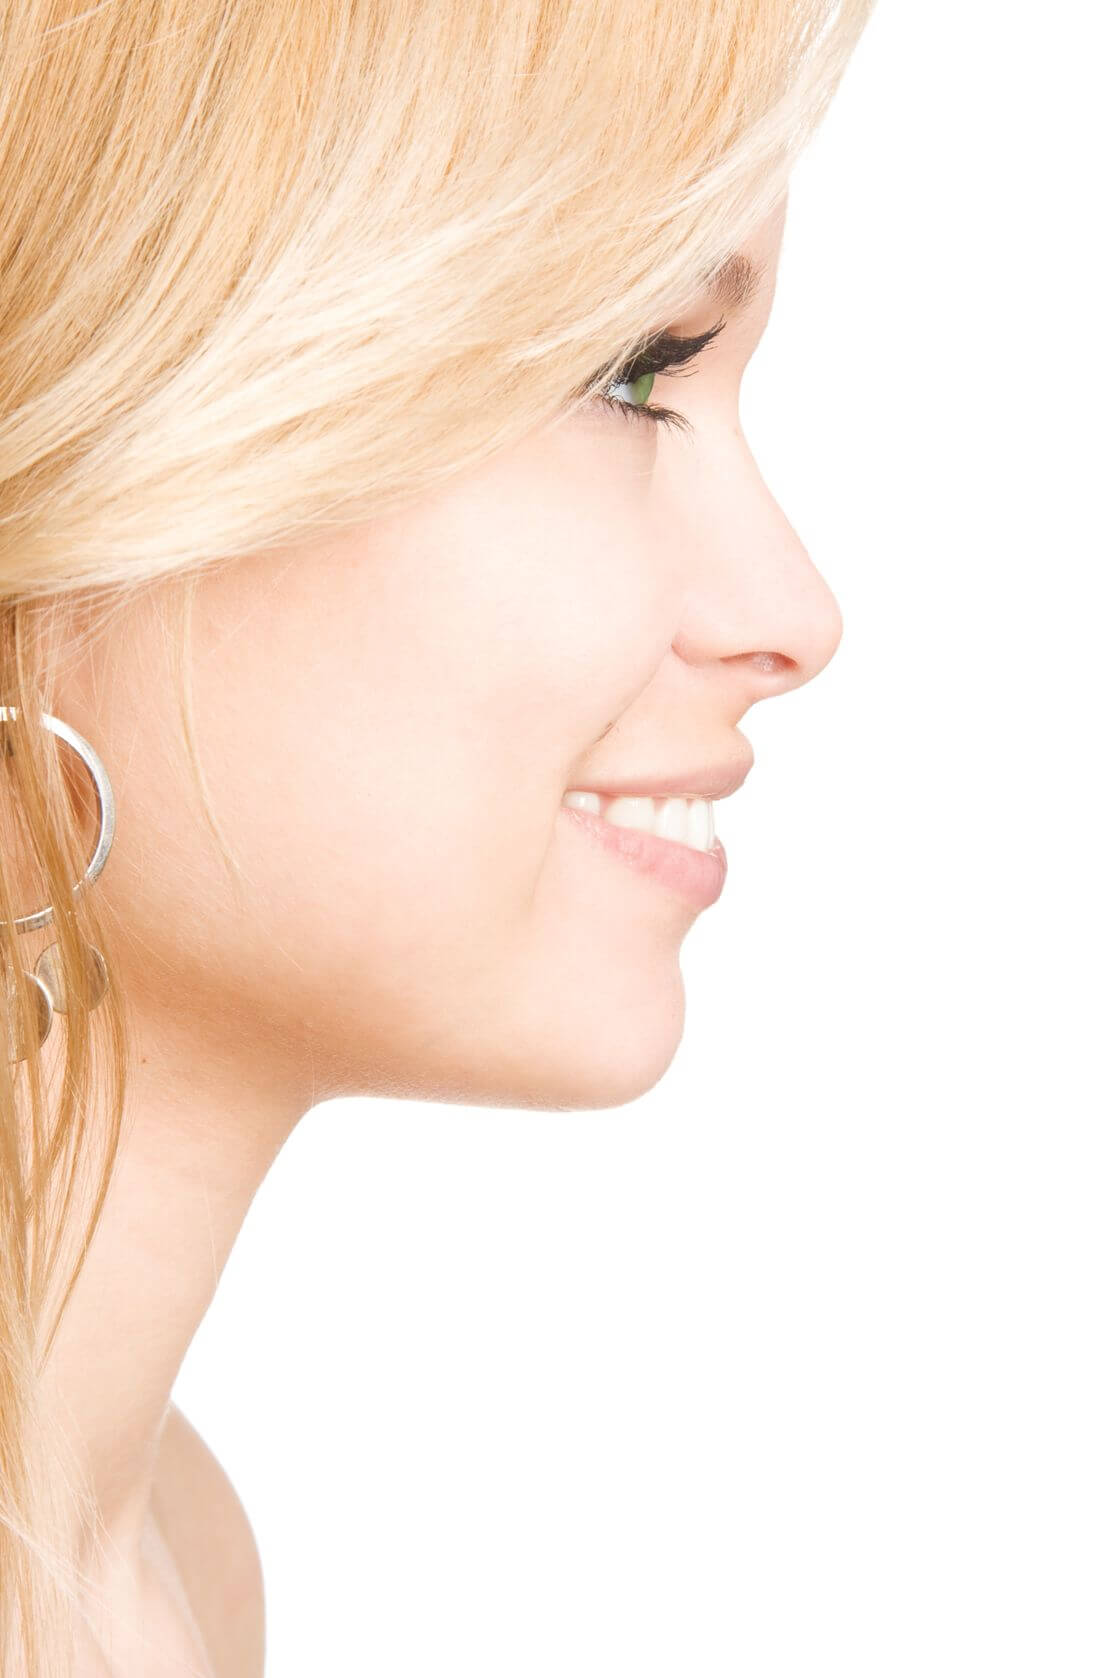 blonde woman side profile nose